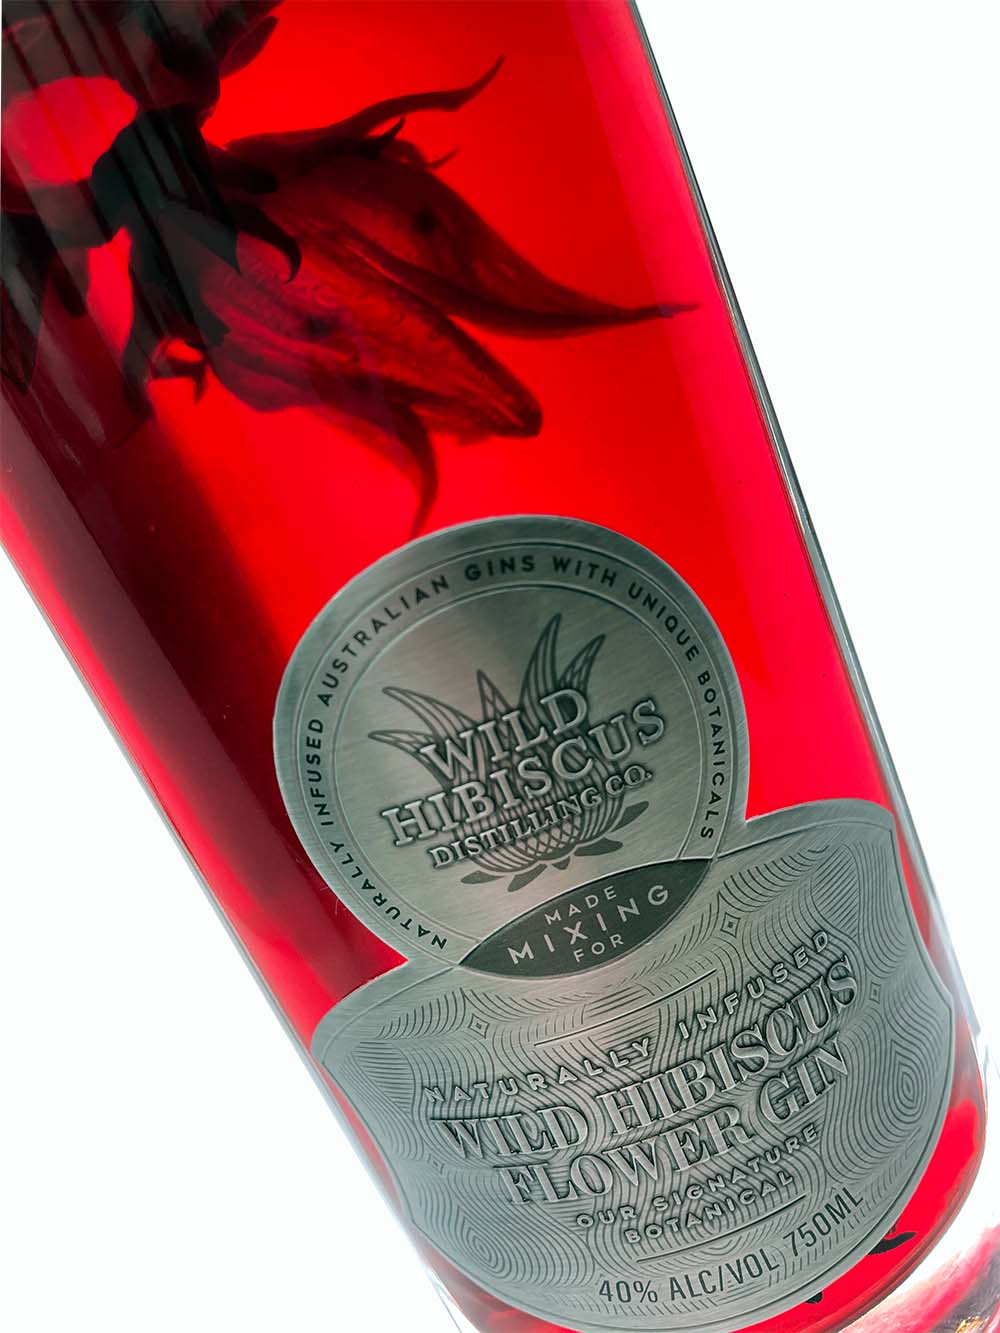 Wild Hibiscus Flower Gin with Ginger 750ml